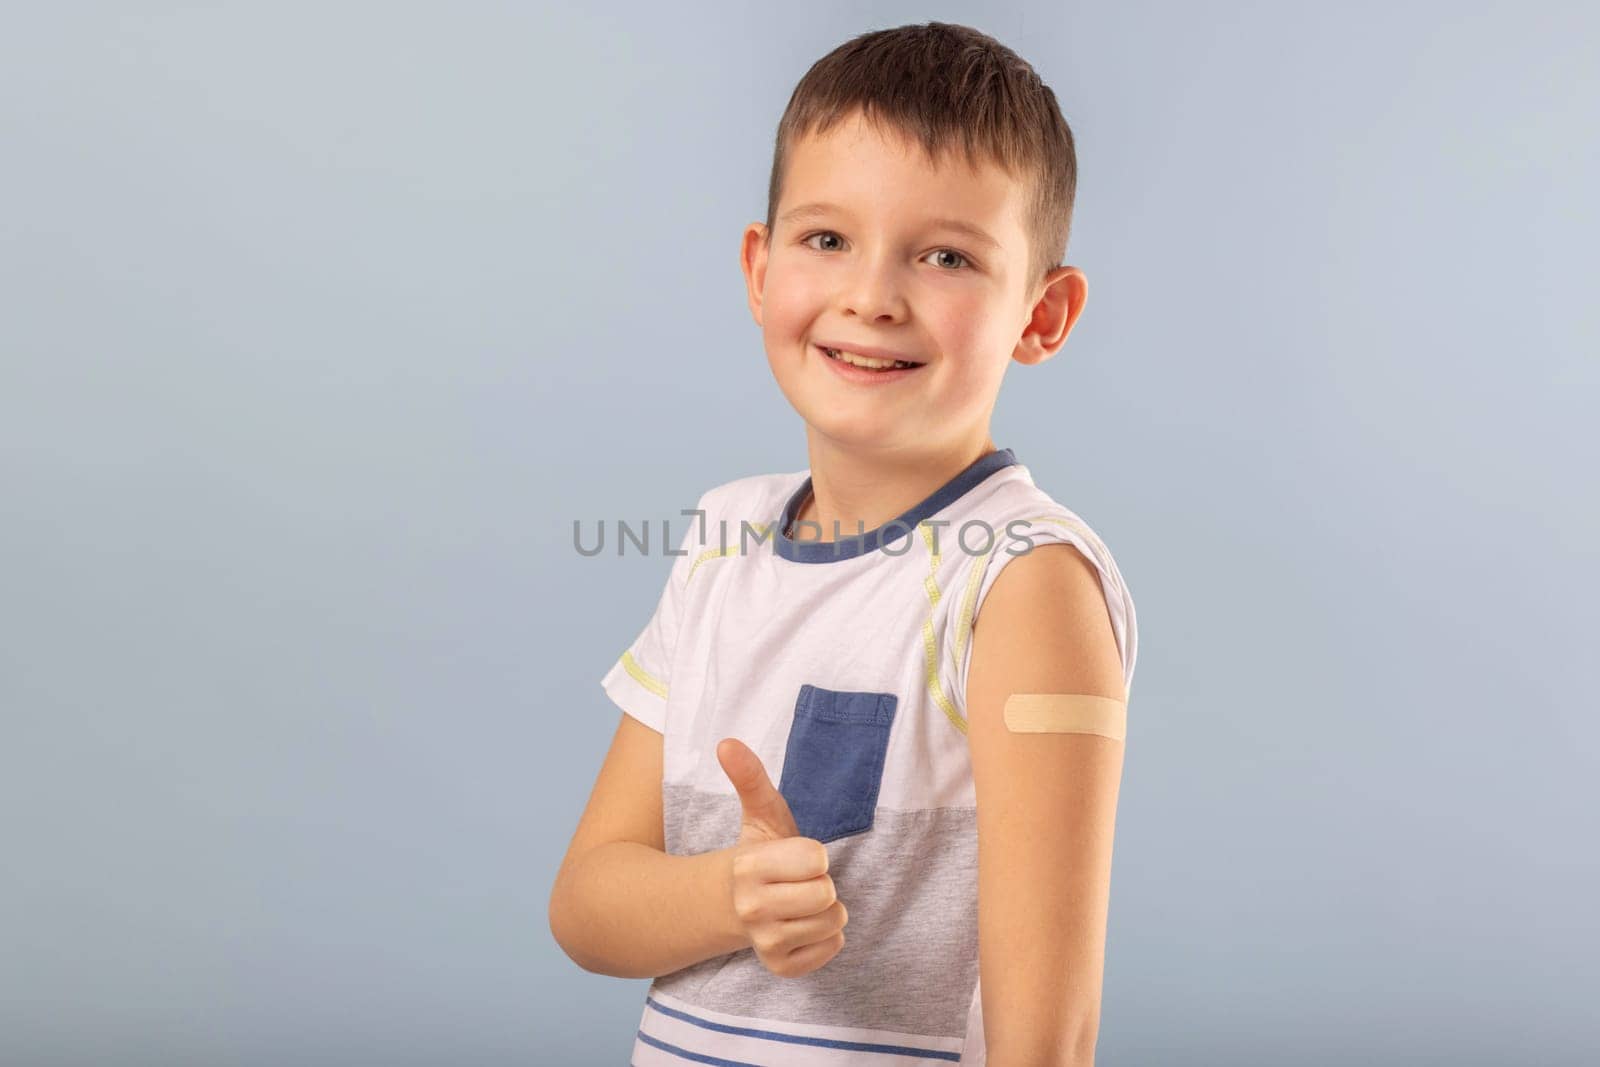 Vaccinated boy gesturing with thumbs up, showing hand with plaster cast after injection of coronavirus vaccine. Start of vaccination campaign for children and teenagers. Successful Covid-19 vaccination.